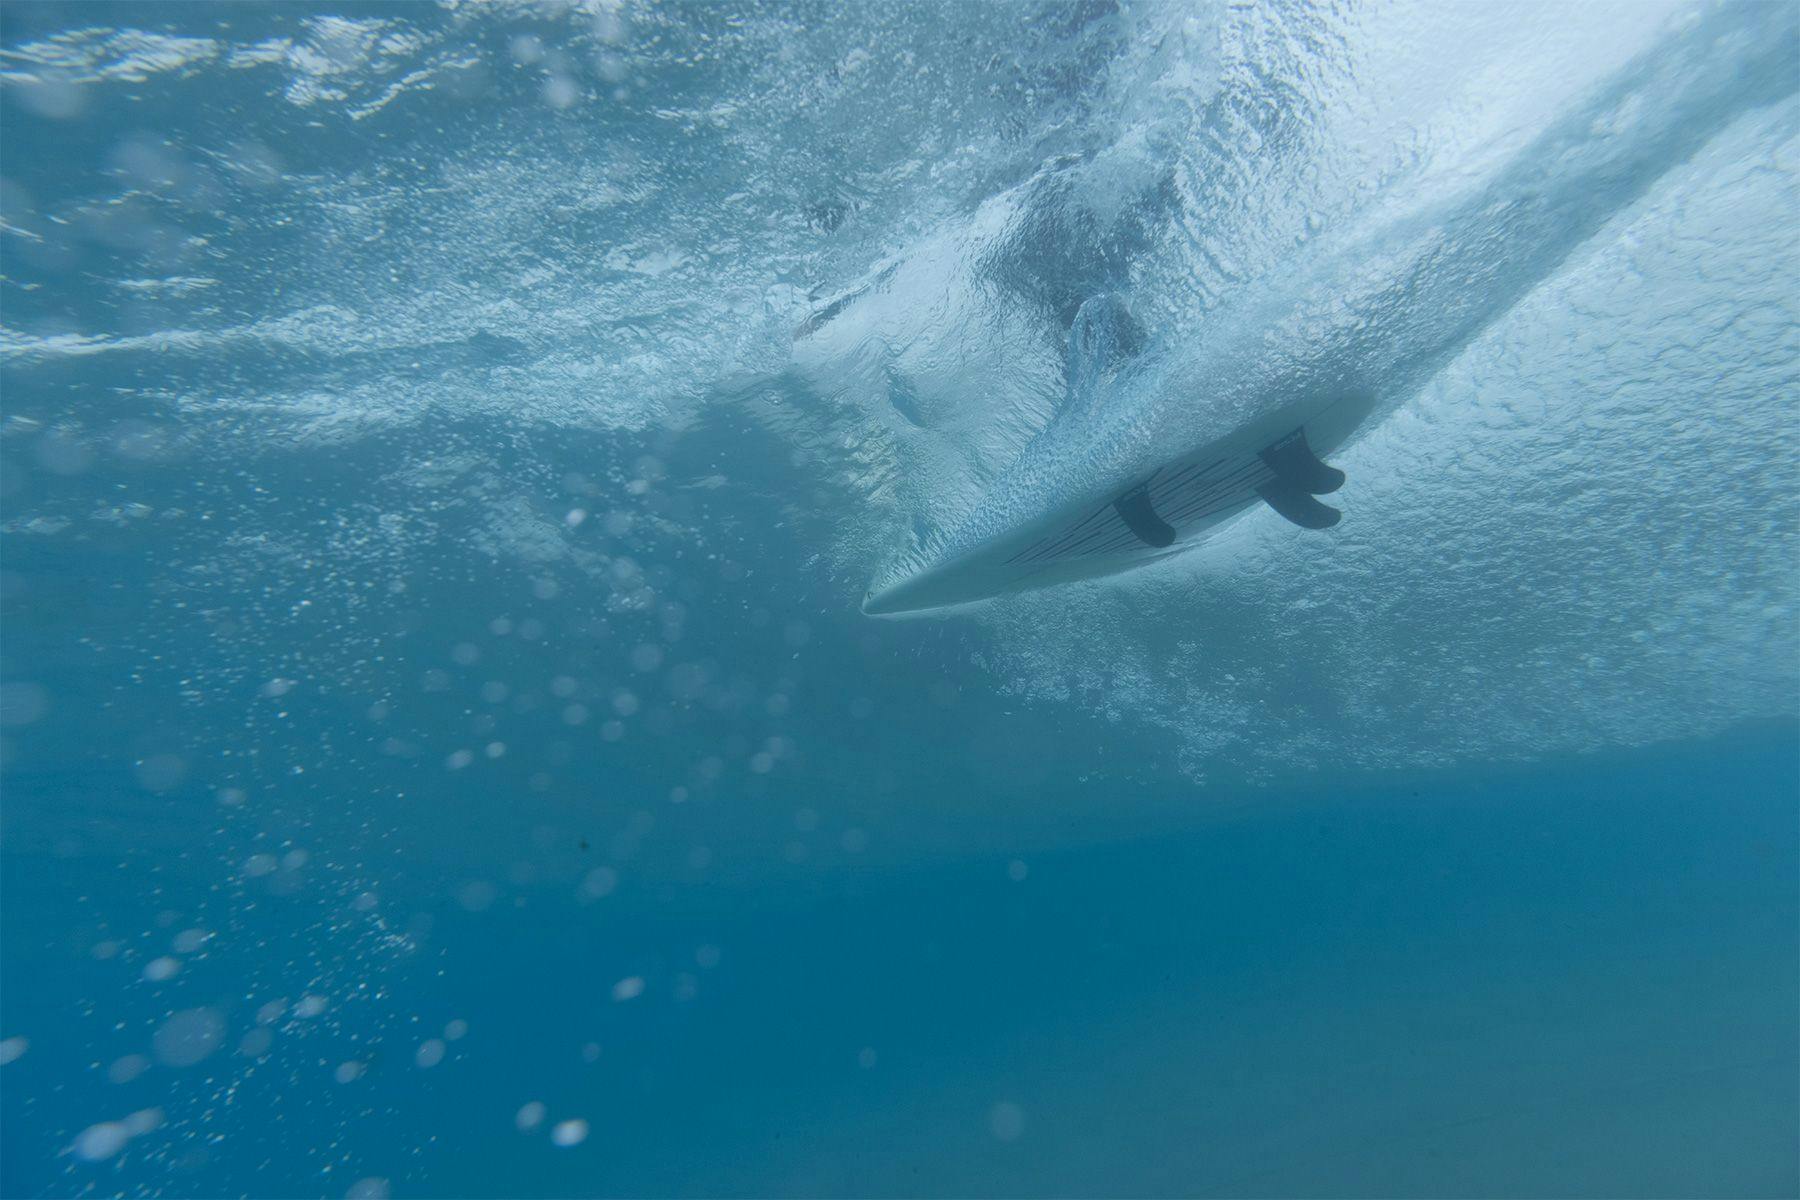 a surfboard travelling along a wave as see from underwater